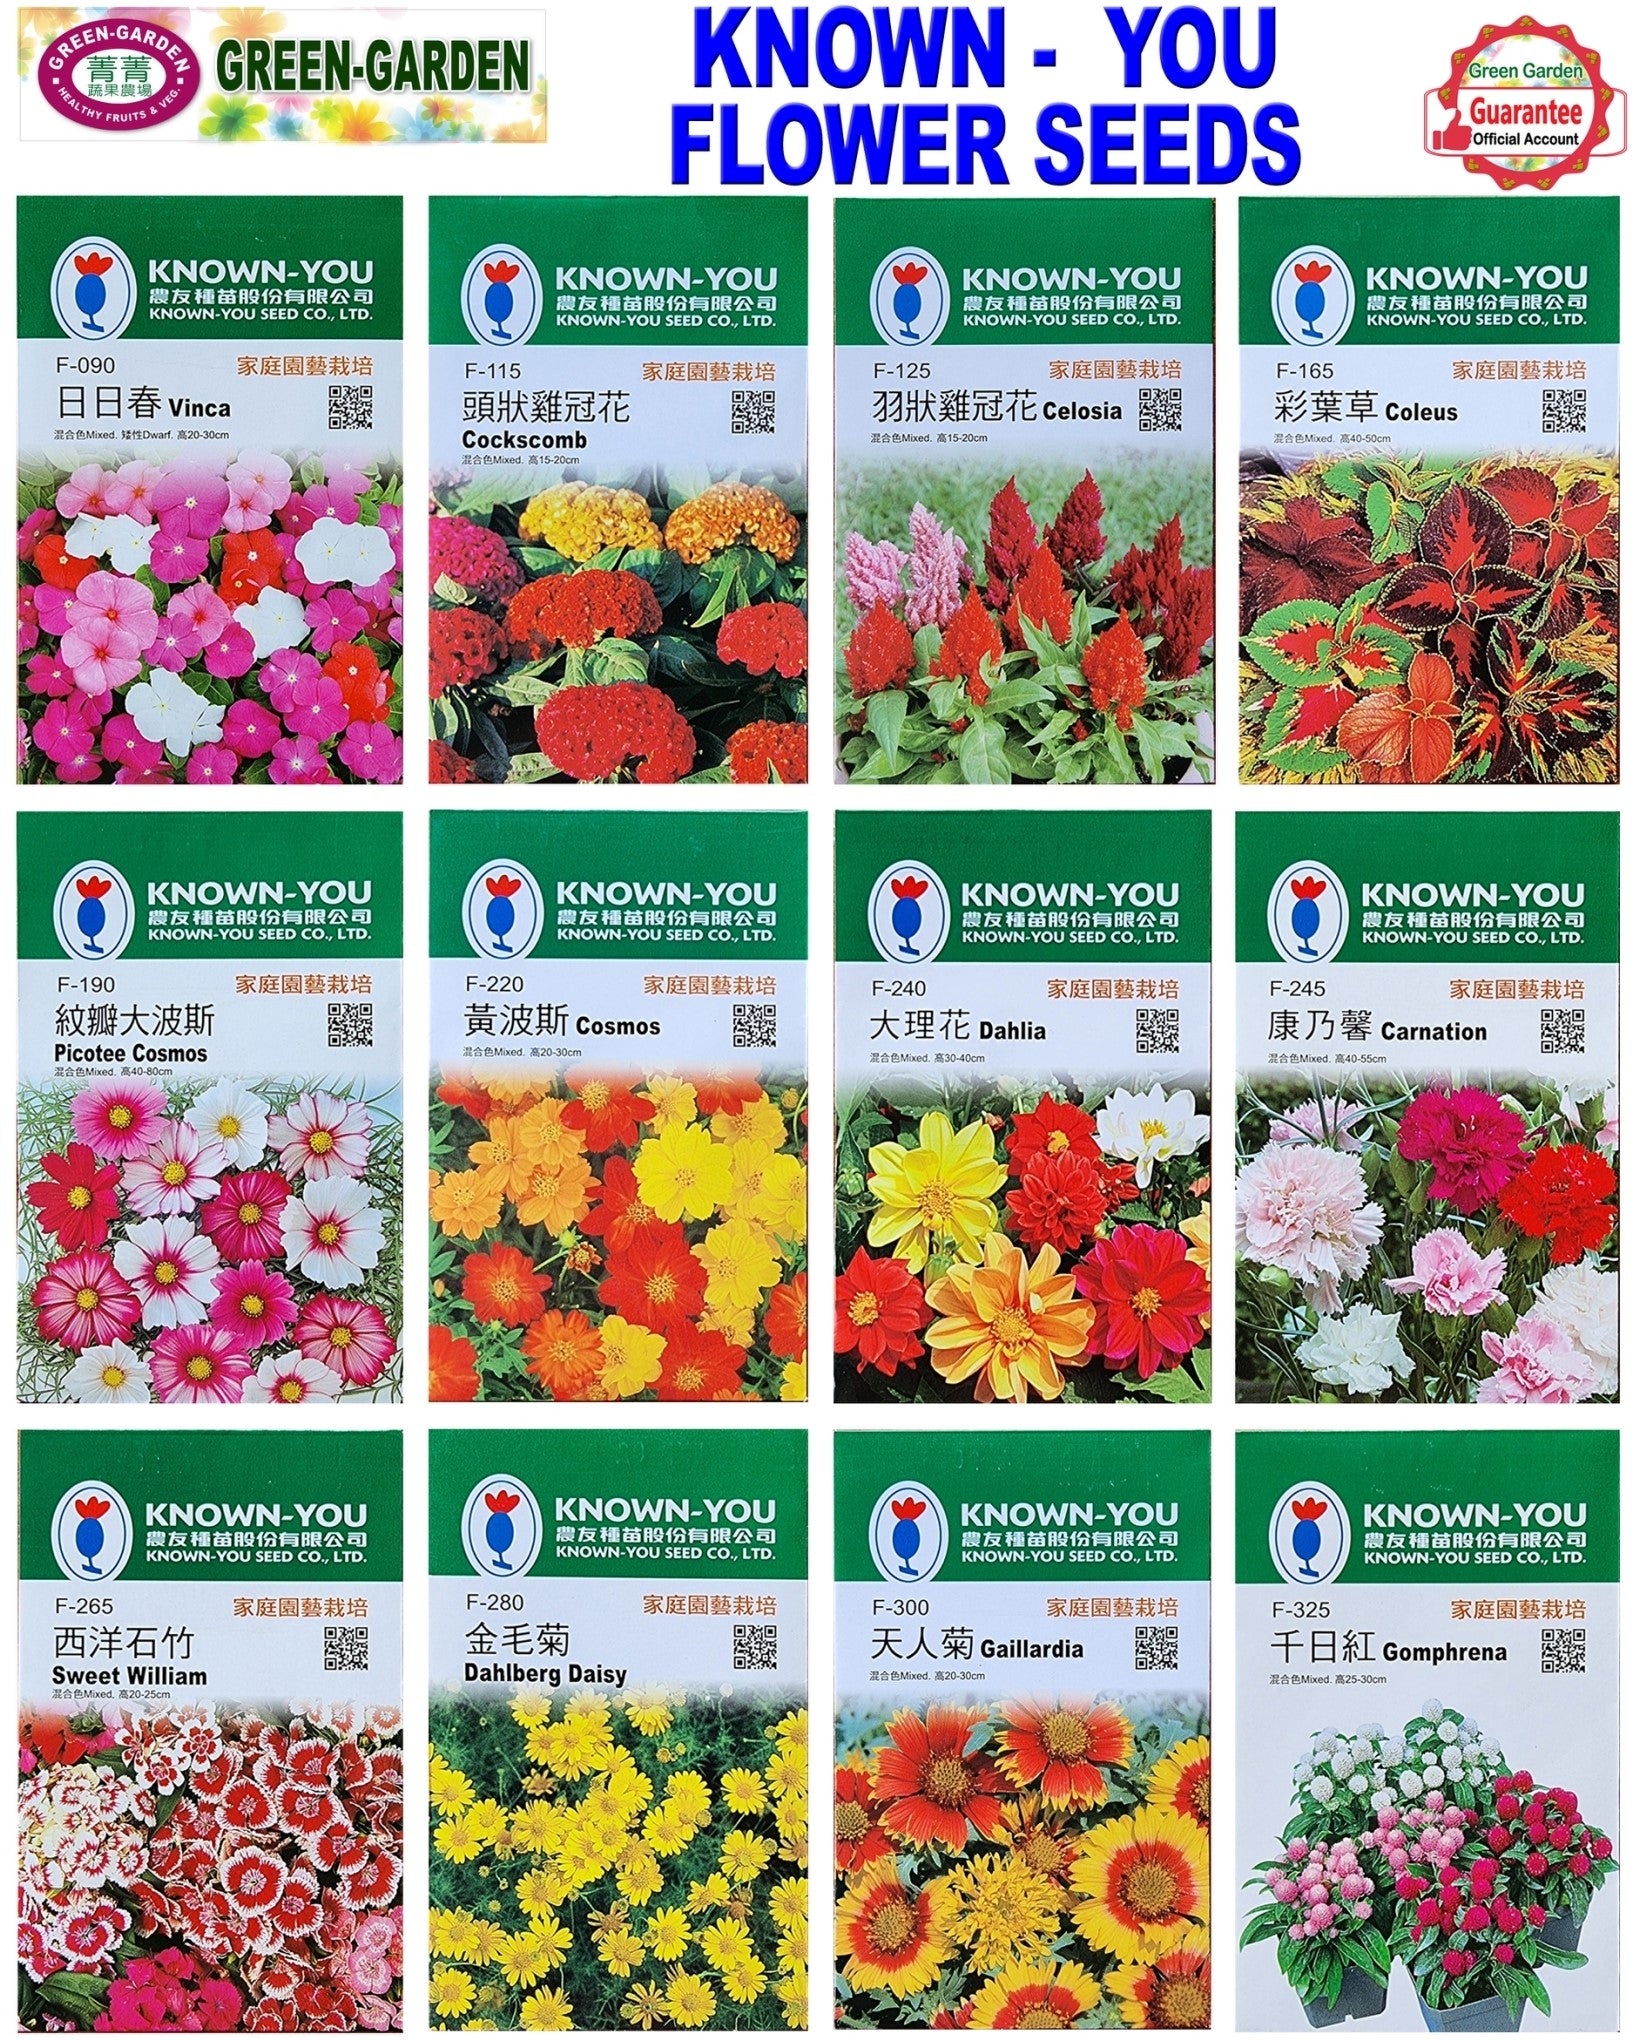 Known You Flower Seeds (F-645 Zinnia)